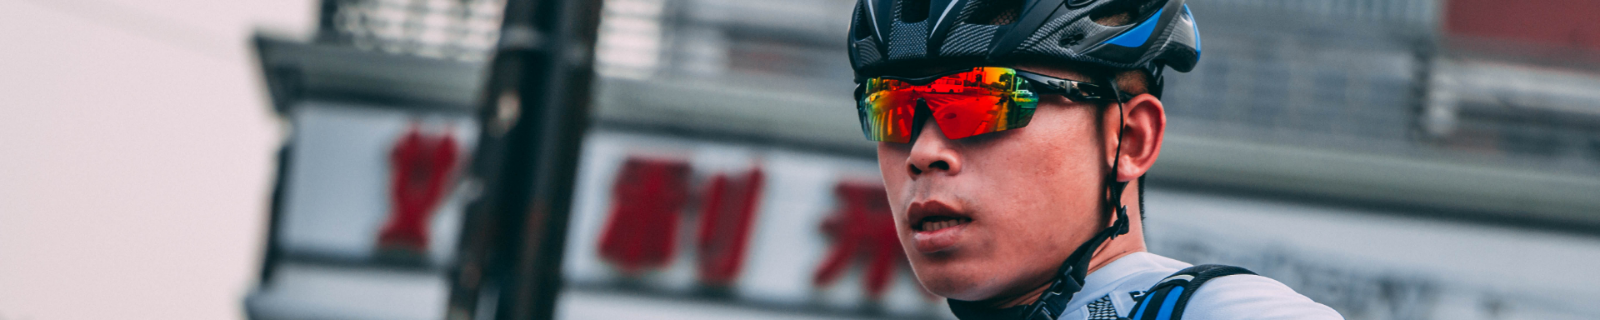 Man in cycling gear with tinted glasses